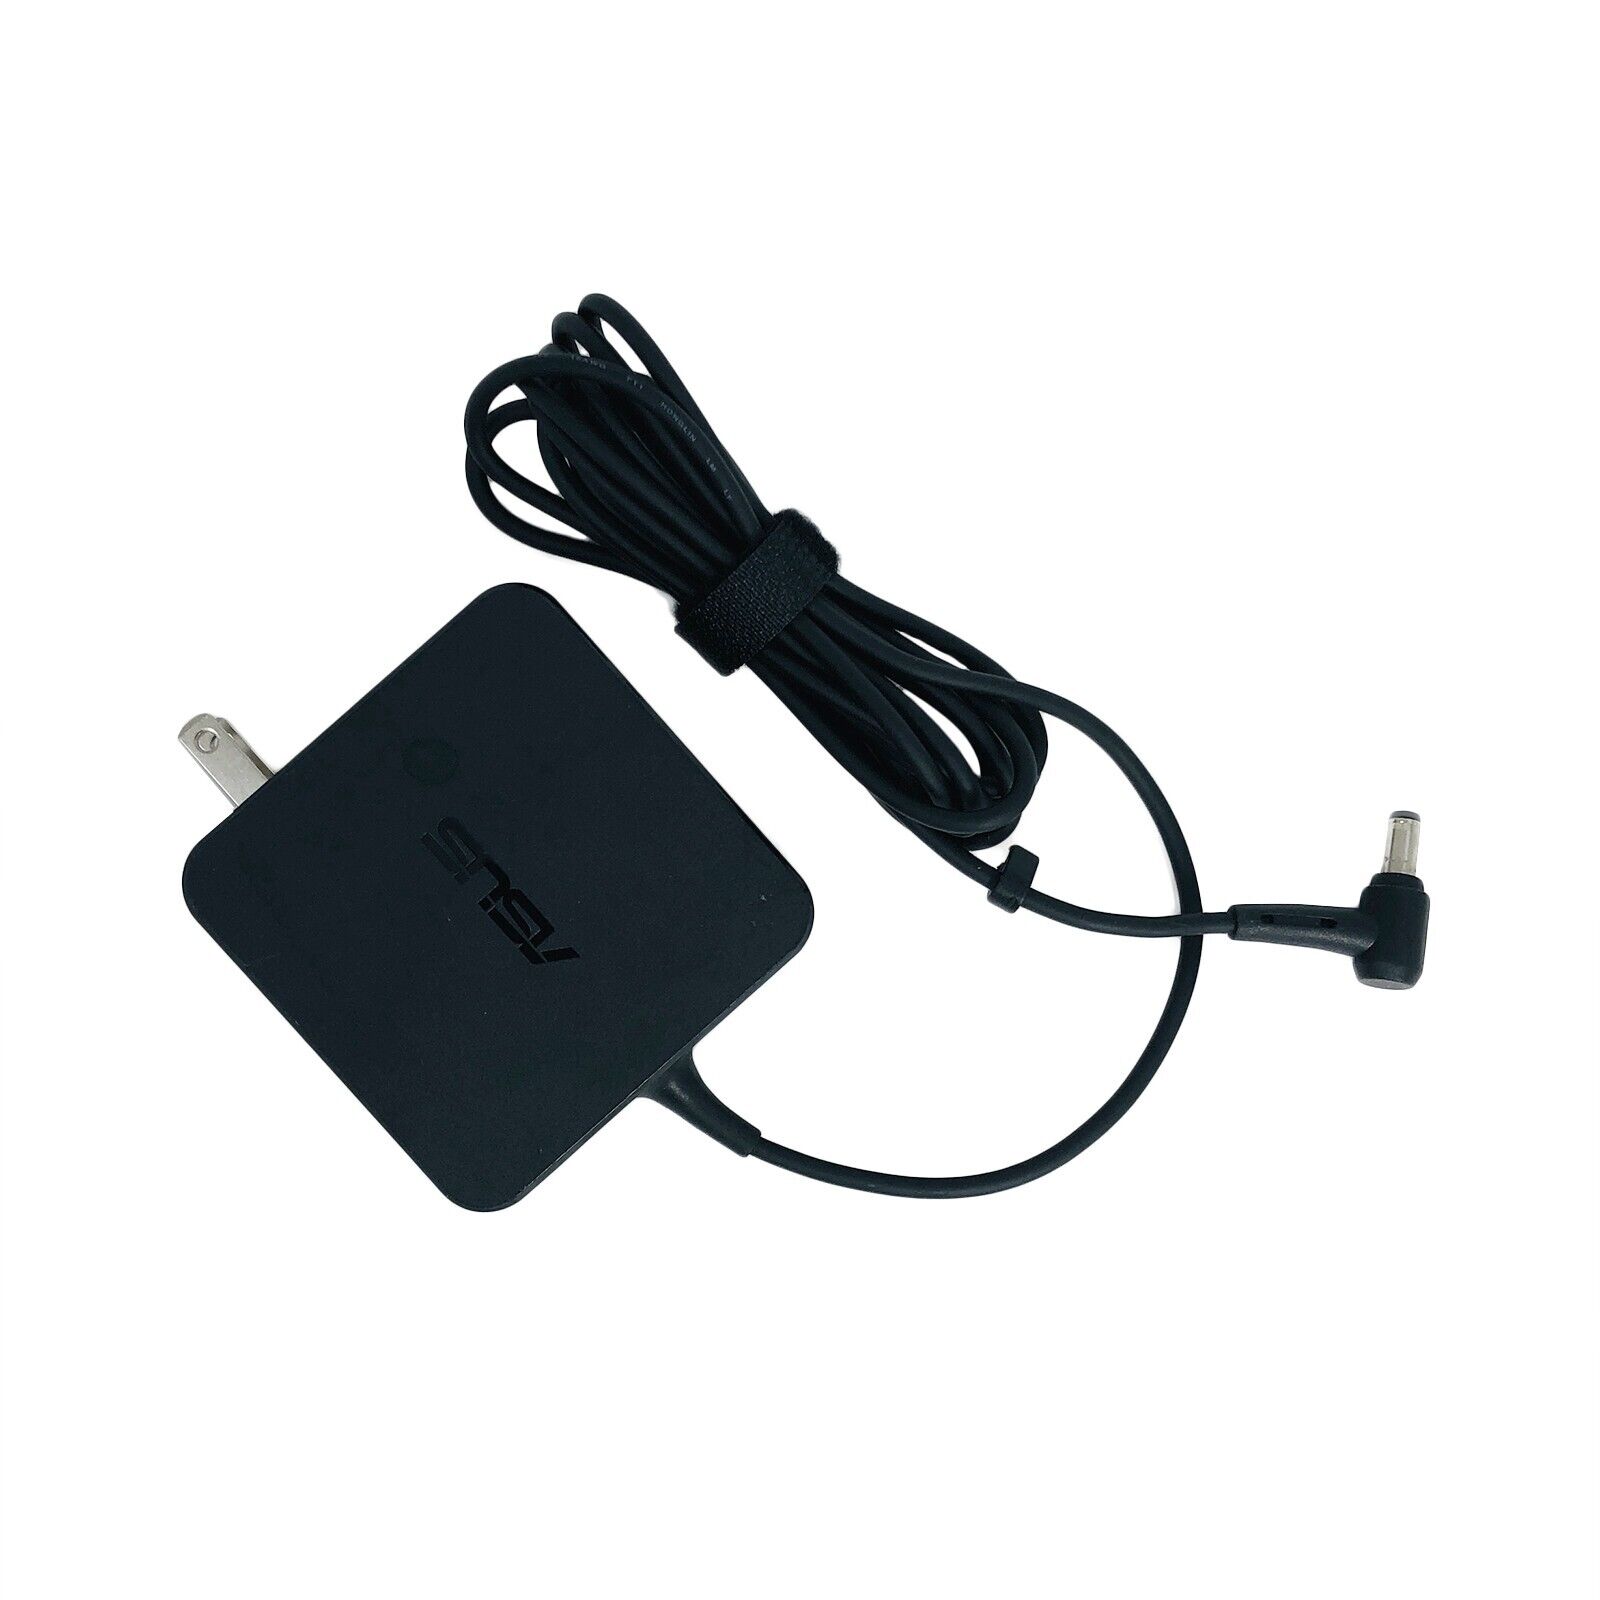 Geniune Asus 65W AC Wall Power Adapter for S300 S300C S300CA S500 Laptop